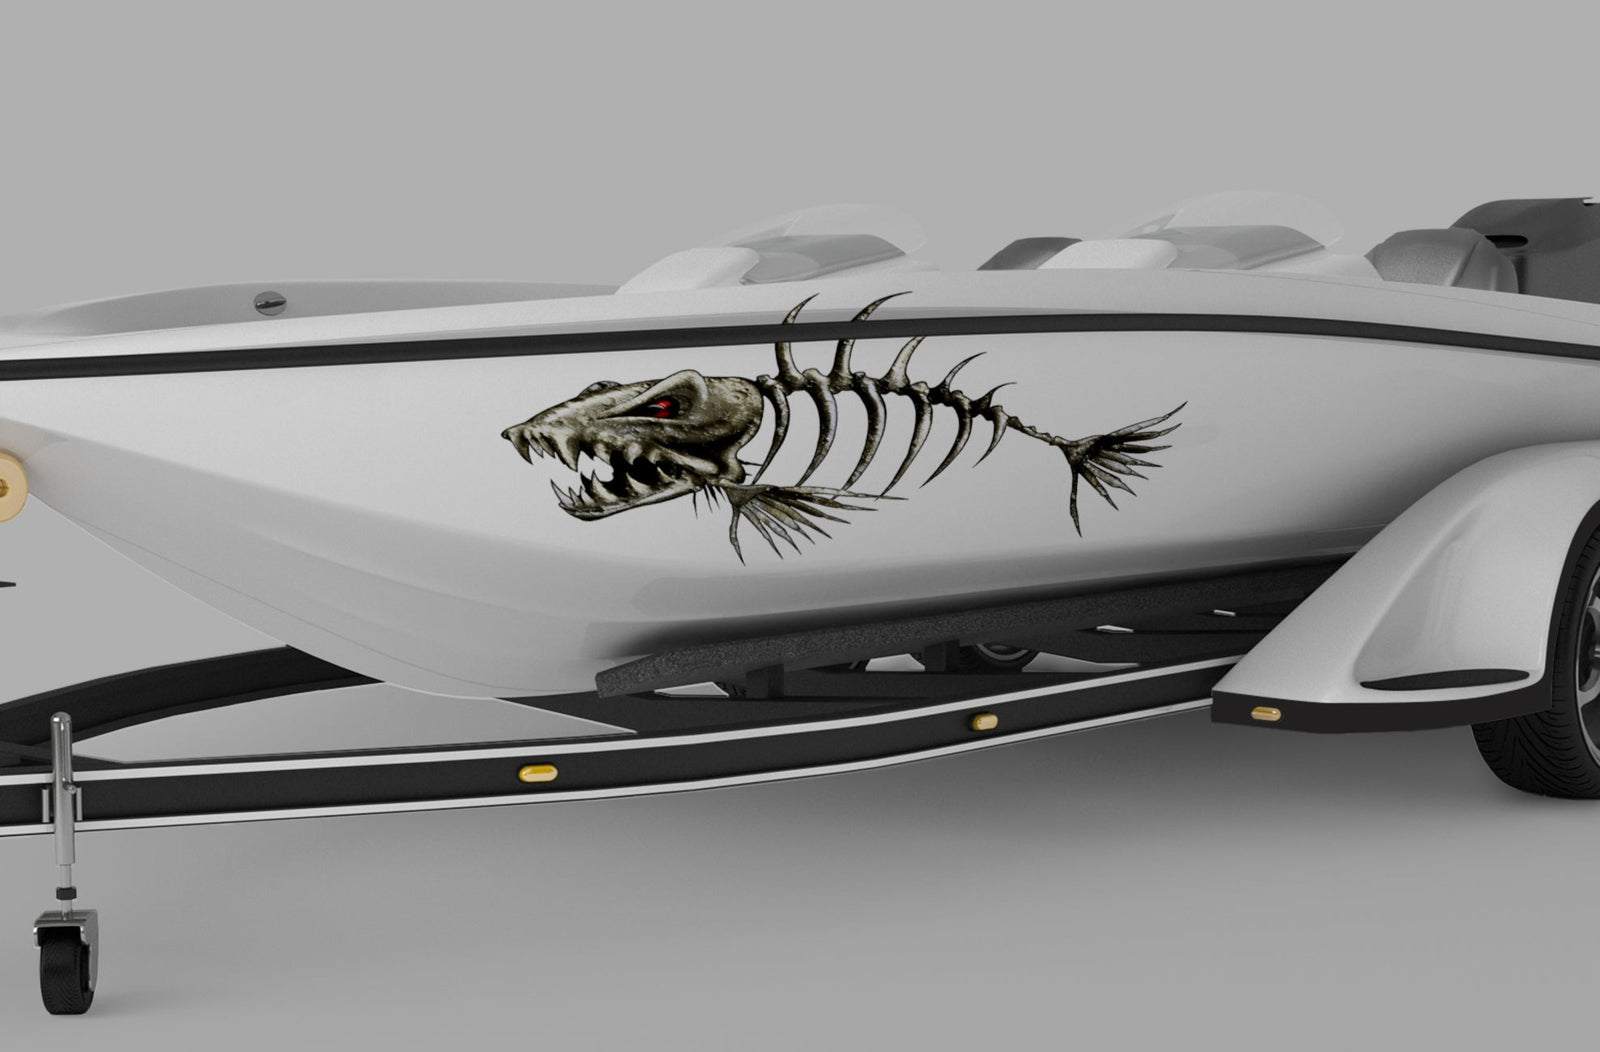 Fish Scull Graphic Boat Decals Compatible With Grady-white Boat